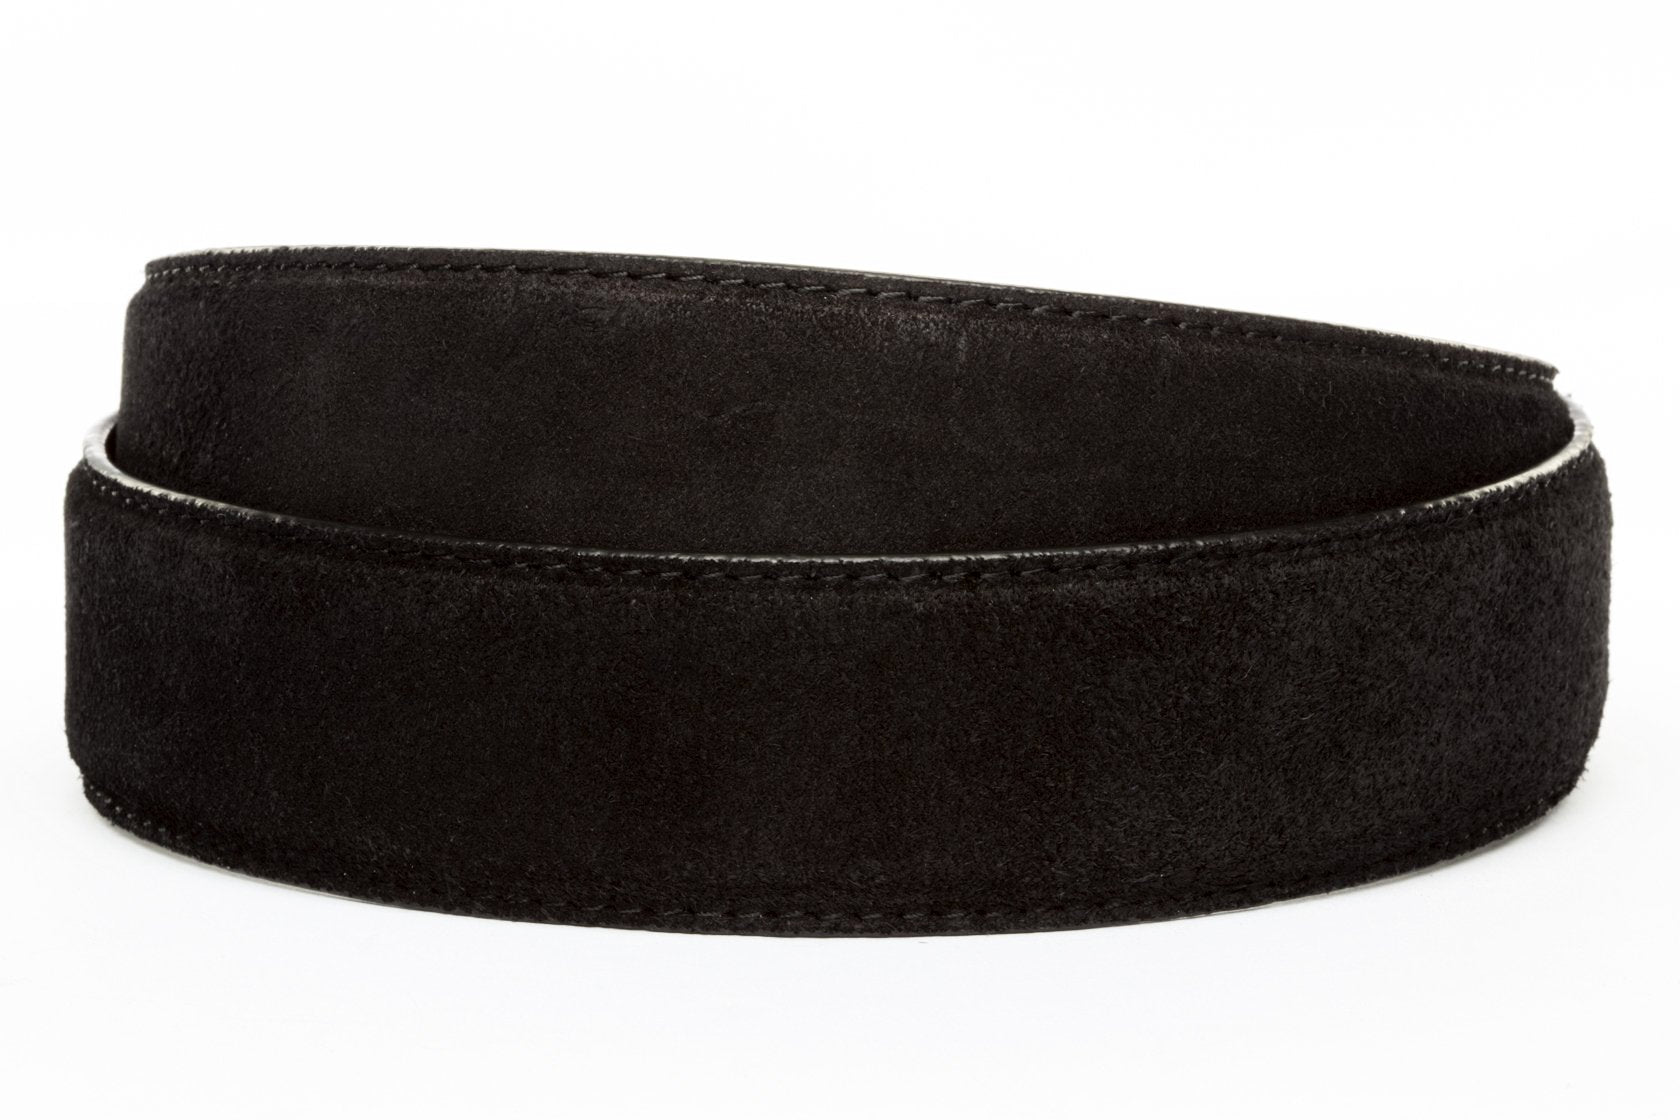 Men's micro-suede belt strap in black, 1.5 inches wide, formal look